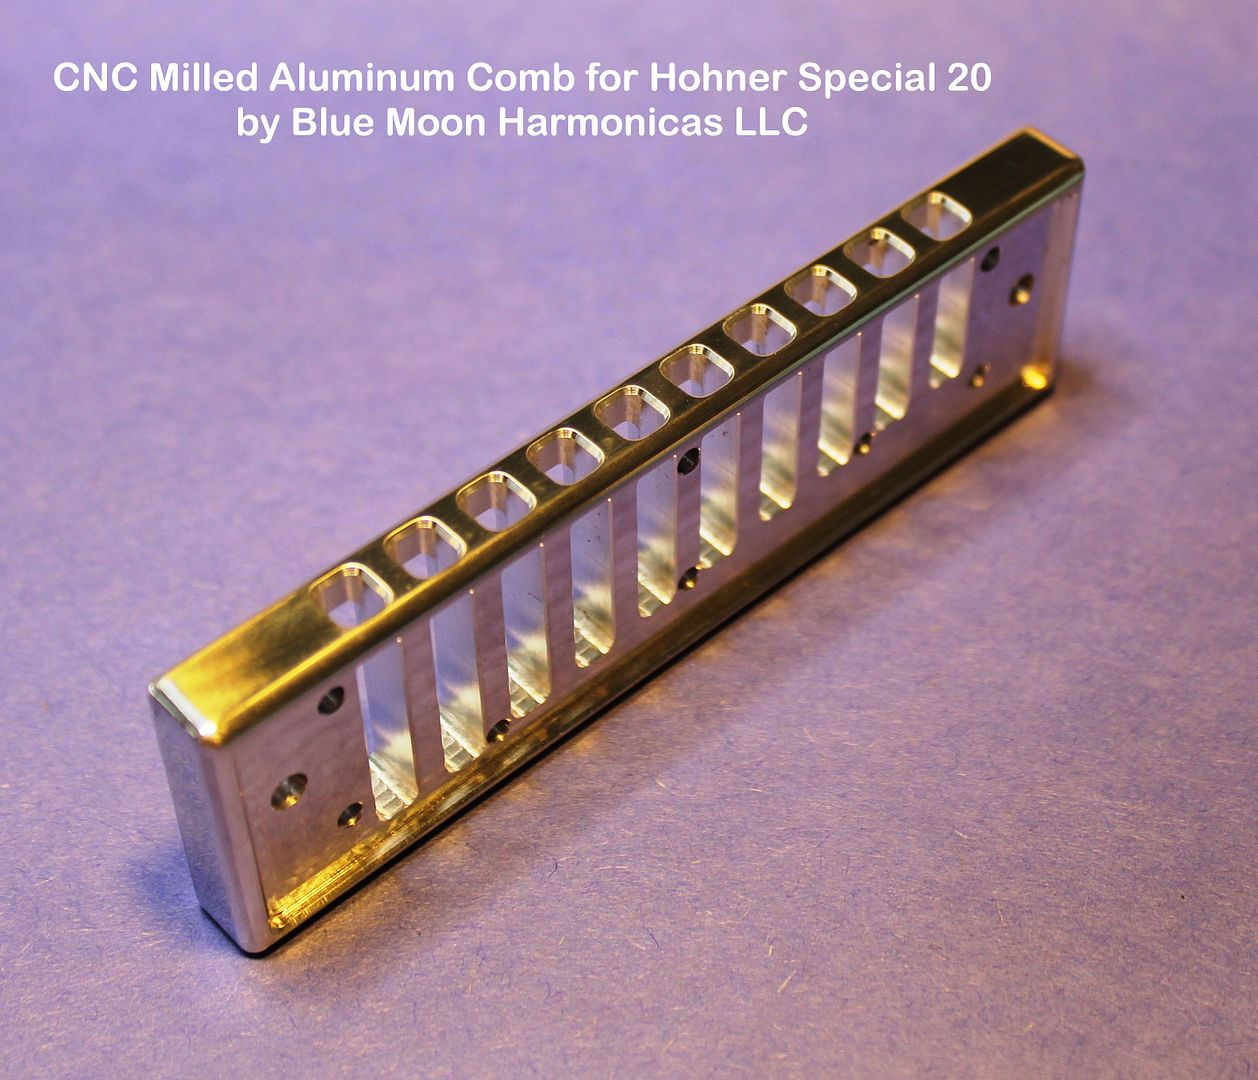 Milled Aluminum Comb for Hohner Special 20 photo h_zps0ed0d35e.jpg